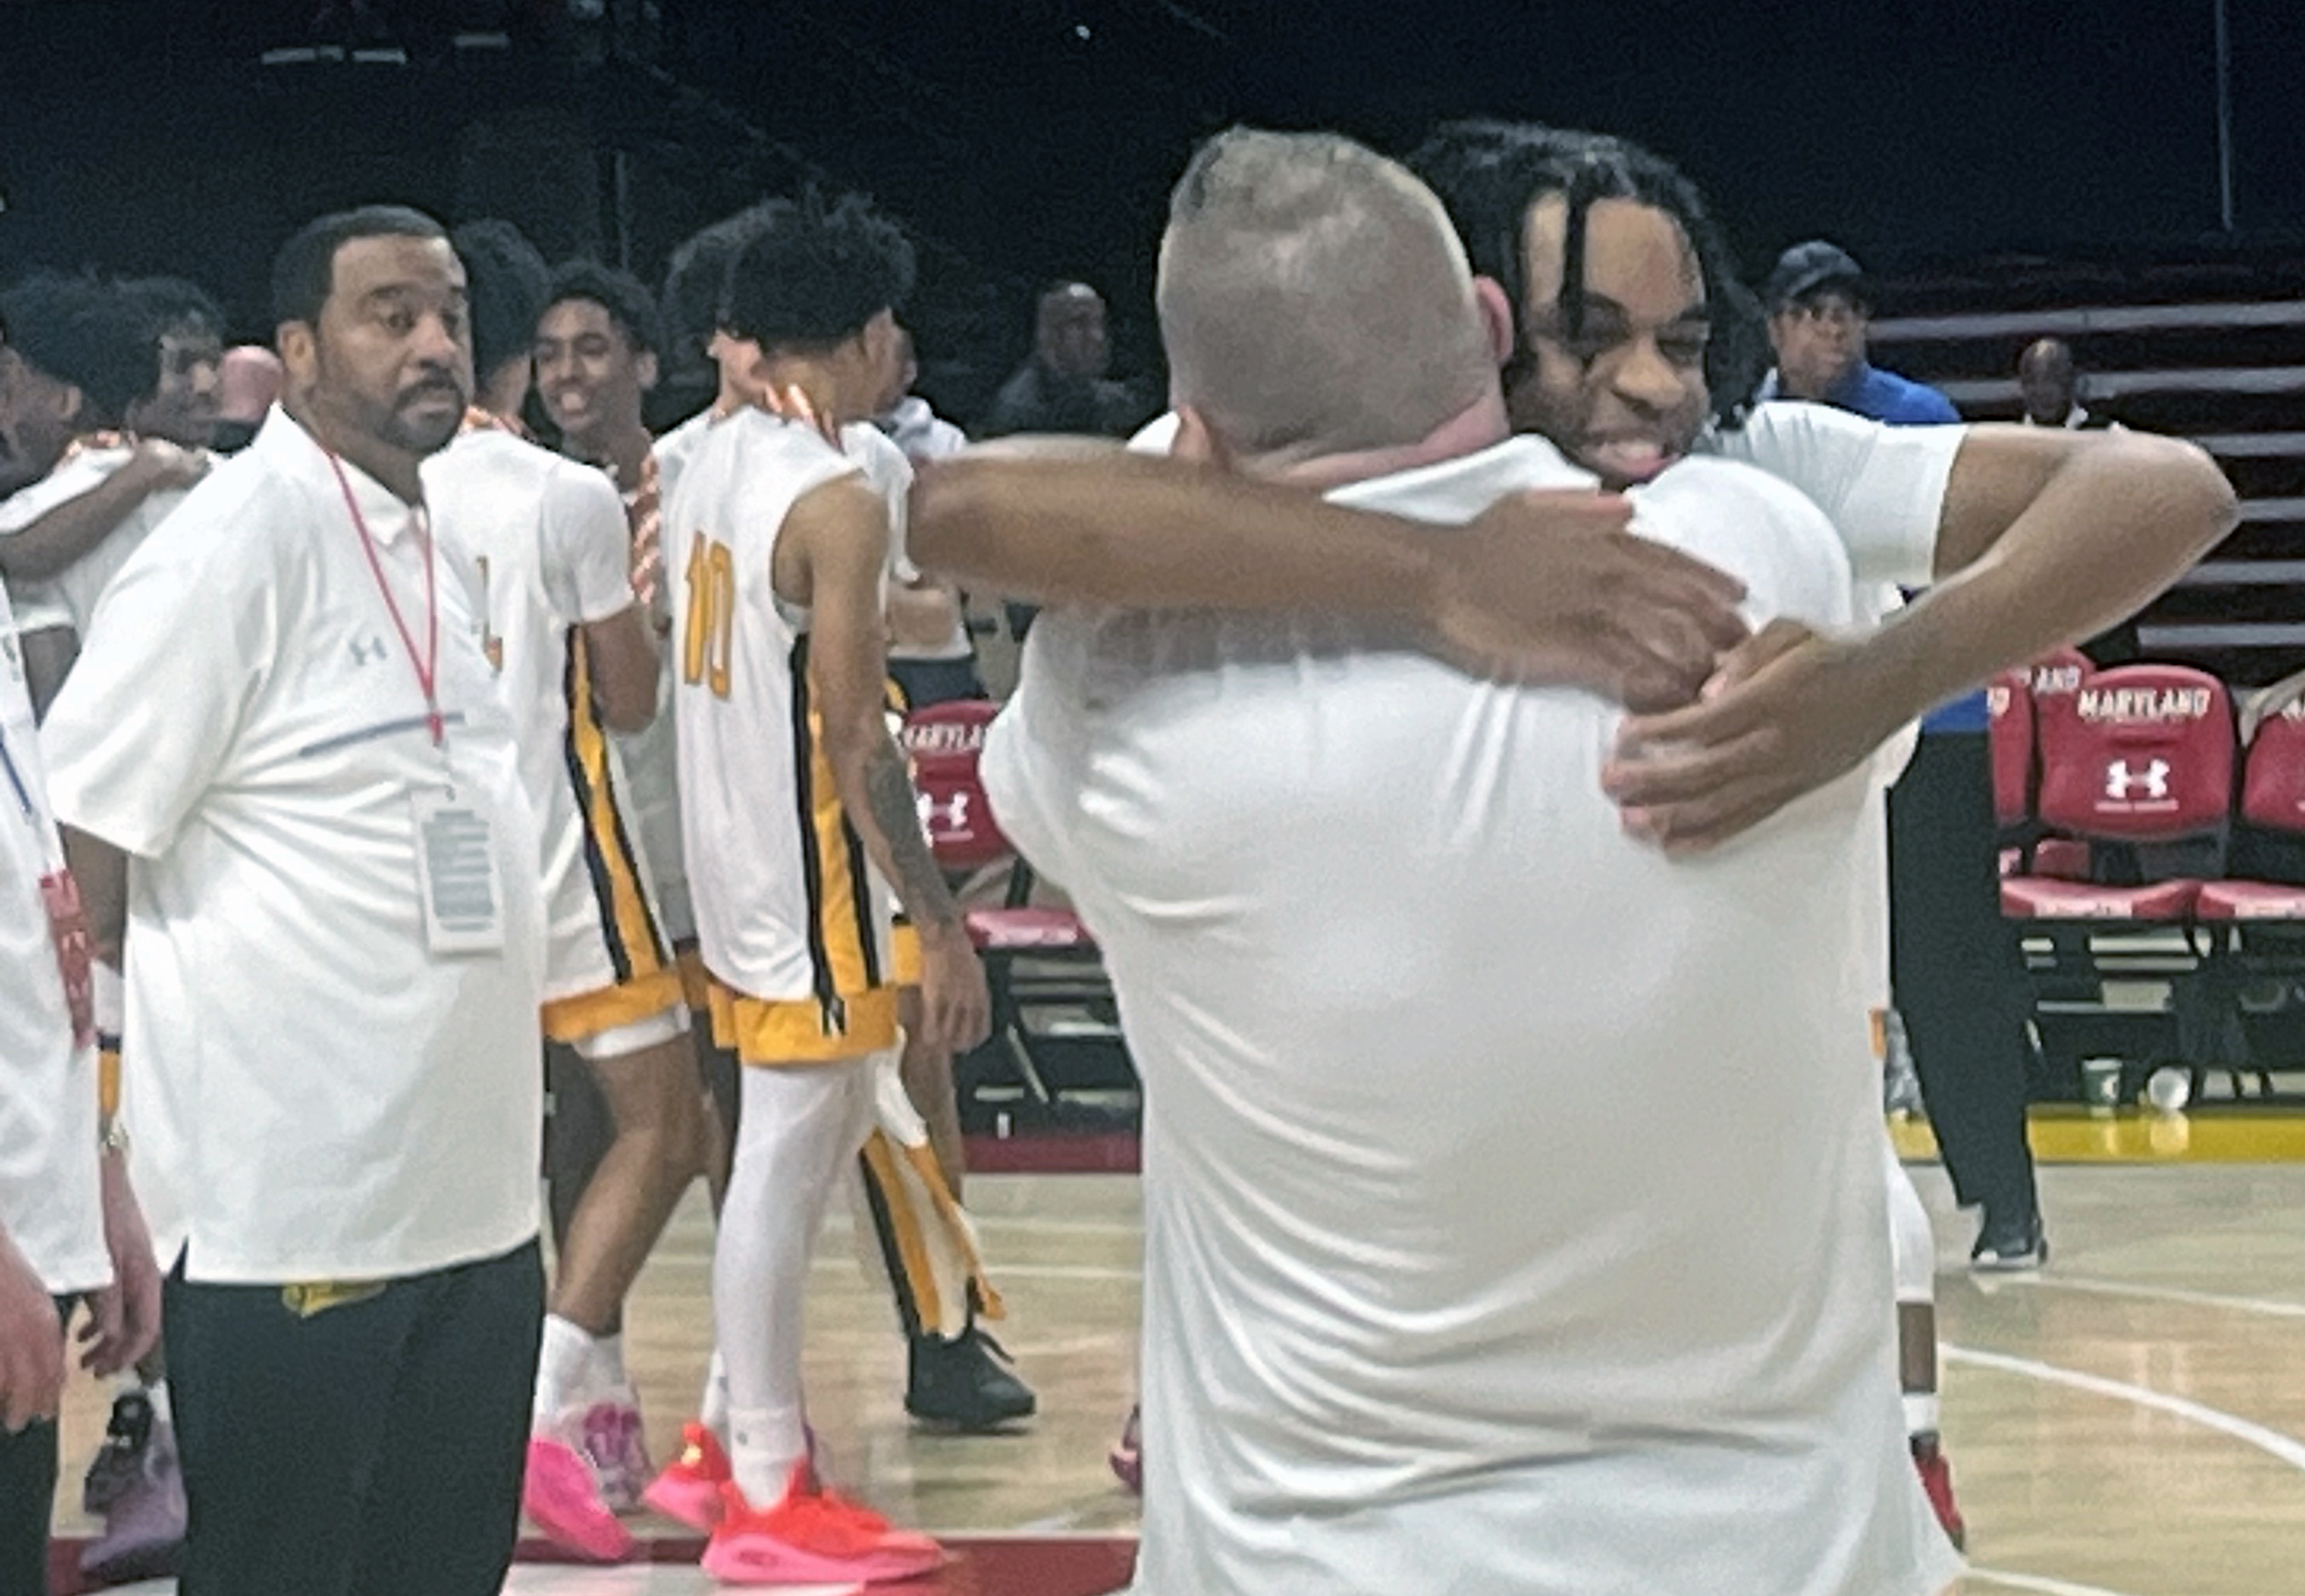 Northeast-AA senior Cameron Albury gets bear-hugged by coach Roger O’Dea during the awards ceremony for the MPSSAA Class 3A boys basketball state championship game. Albury led a furious fourth quarter comeback as the Eagles defeated St. Charles, 69-66. 